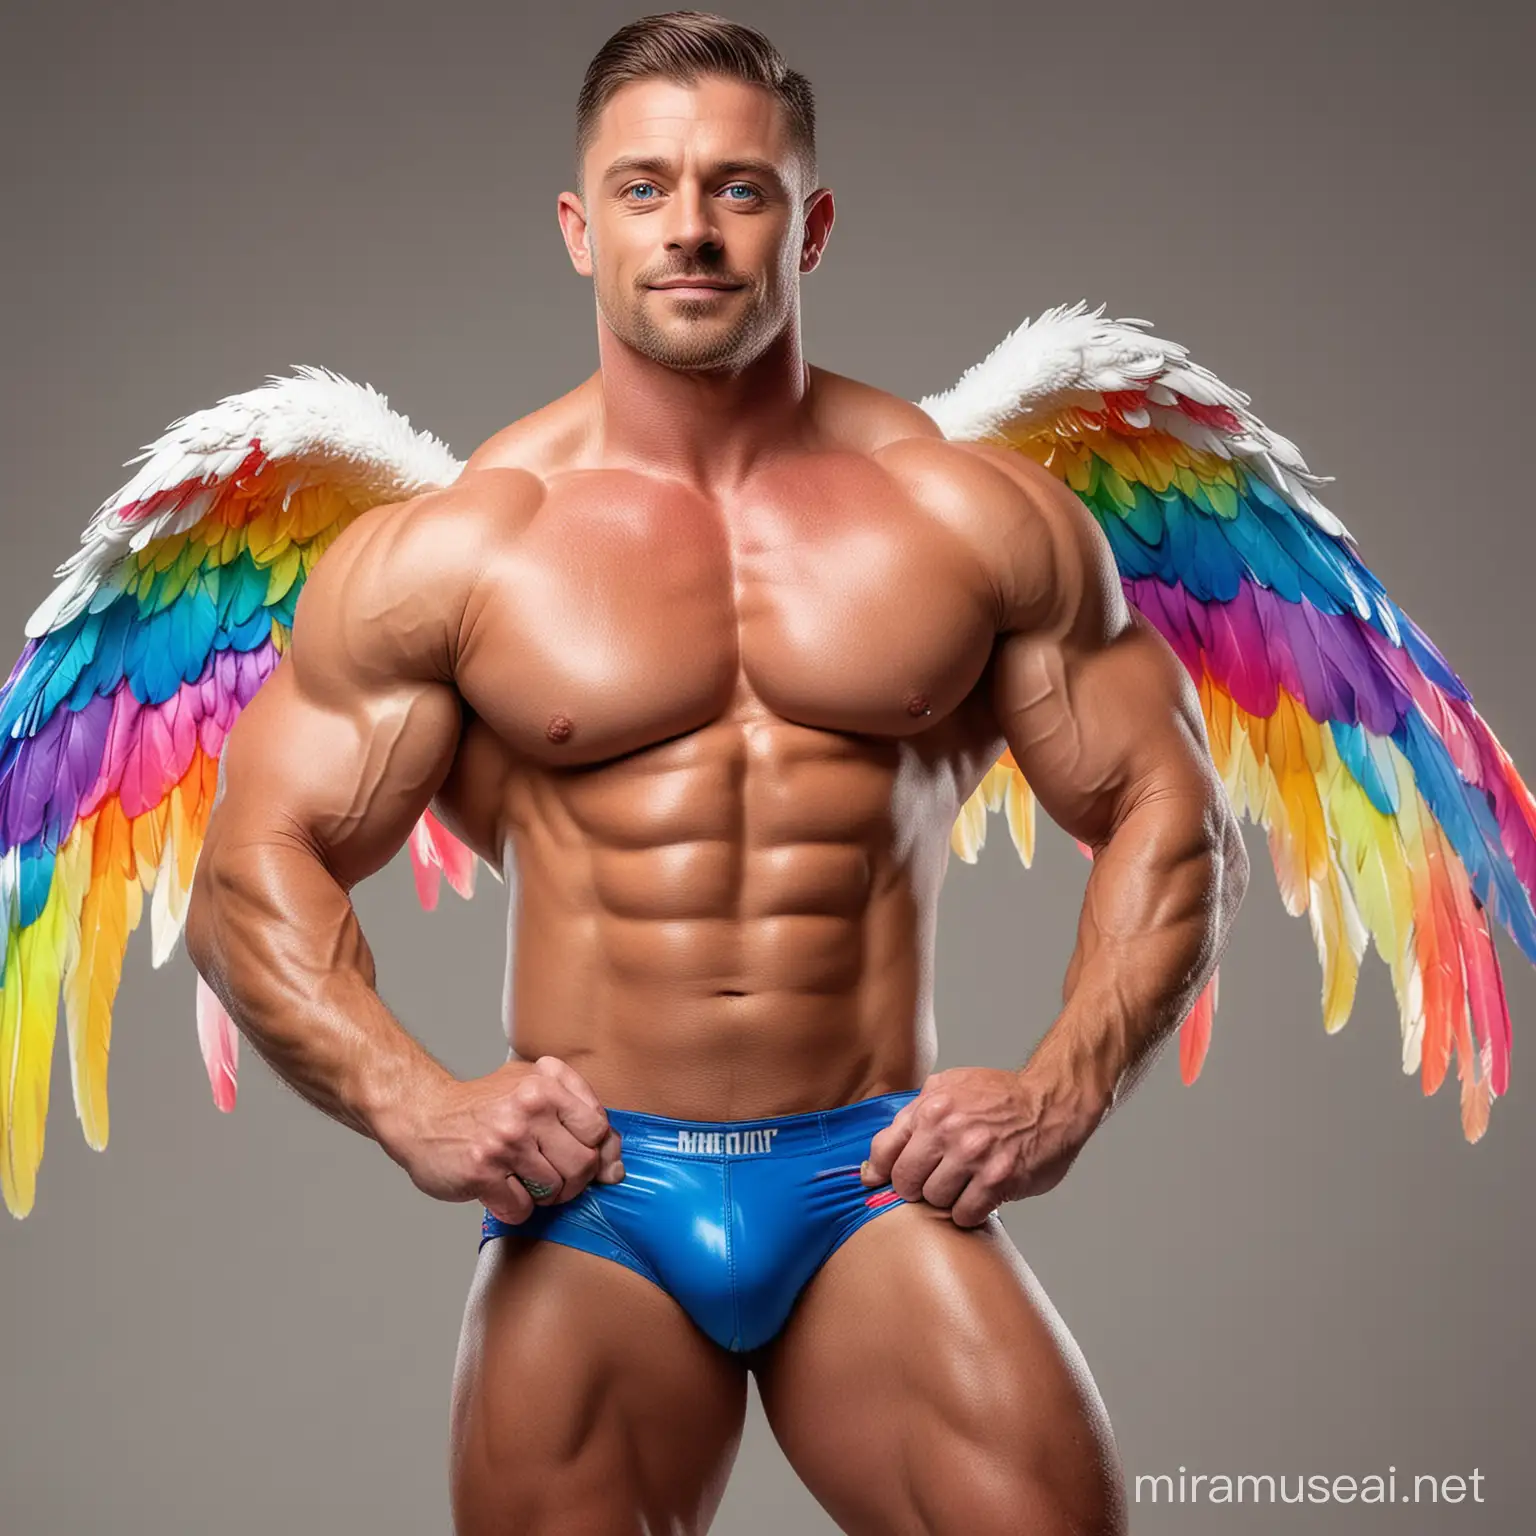 Muscular 30s Bodybuilder with Rainbow LED Jacket and Eagle Wings Pose